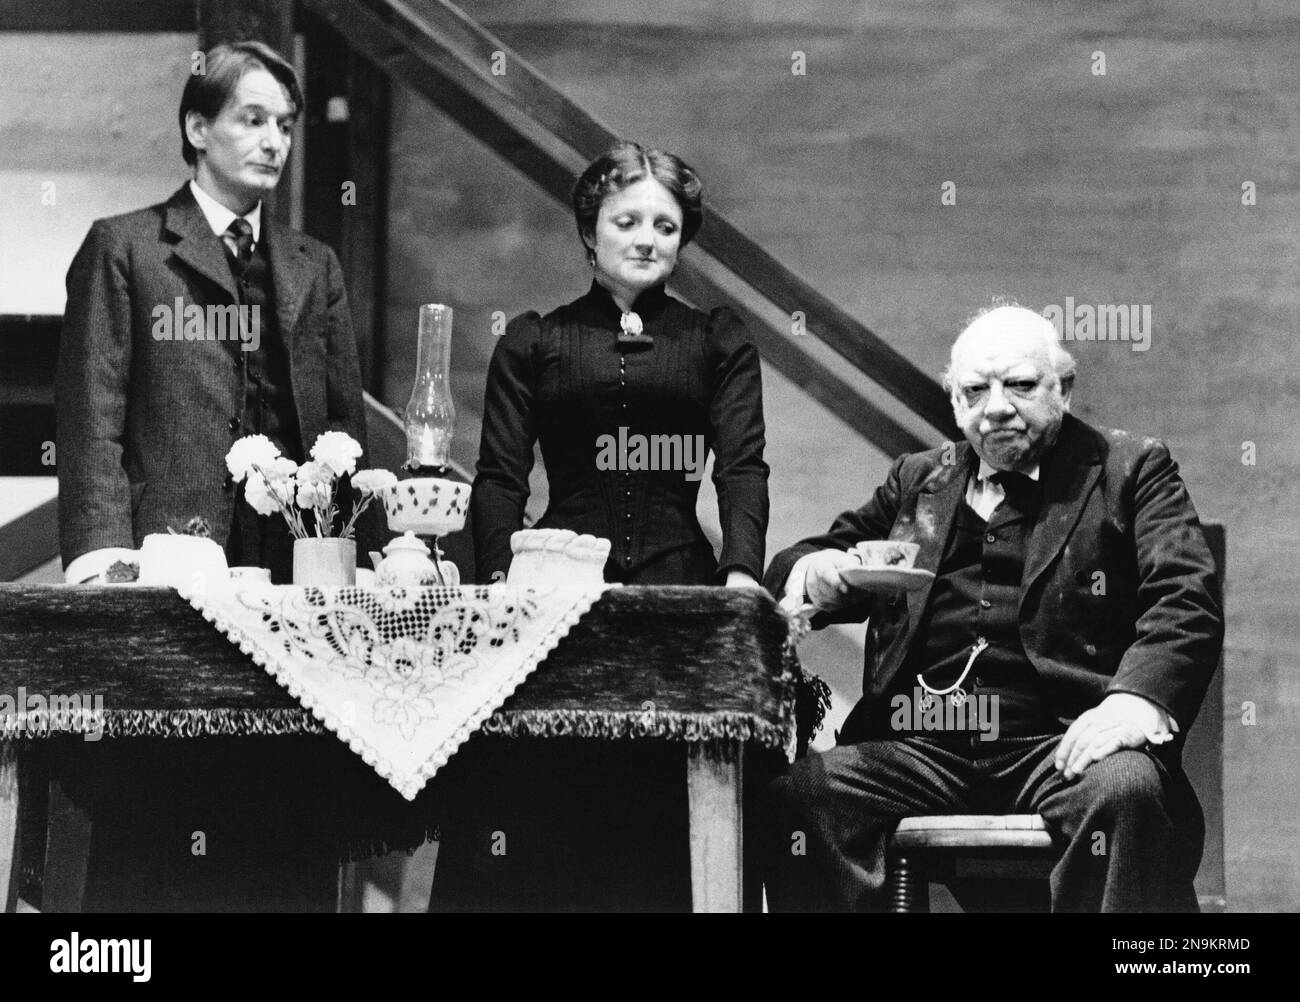 l-r: Ronald Pickup (William Mossop), Julia McKenzie (Maggie Hobson), Arthur Lowe (Henry Horatio Hobson) in HOBSON'S CHOICE by Harold Brighouse at the Lyric Theatre Hammersmith, London W6  02/02/1981  set design: Kenneth Mellor  costumes: Mark Negin  lighting: Mark Dawson  director: David Giles Stock Photo